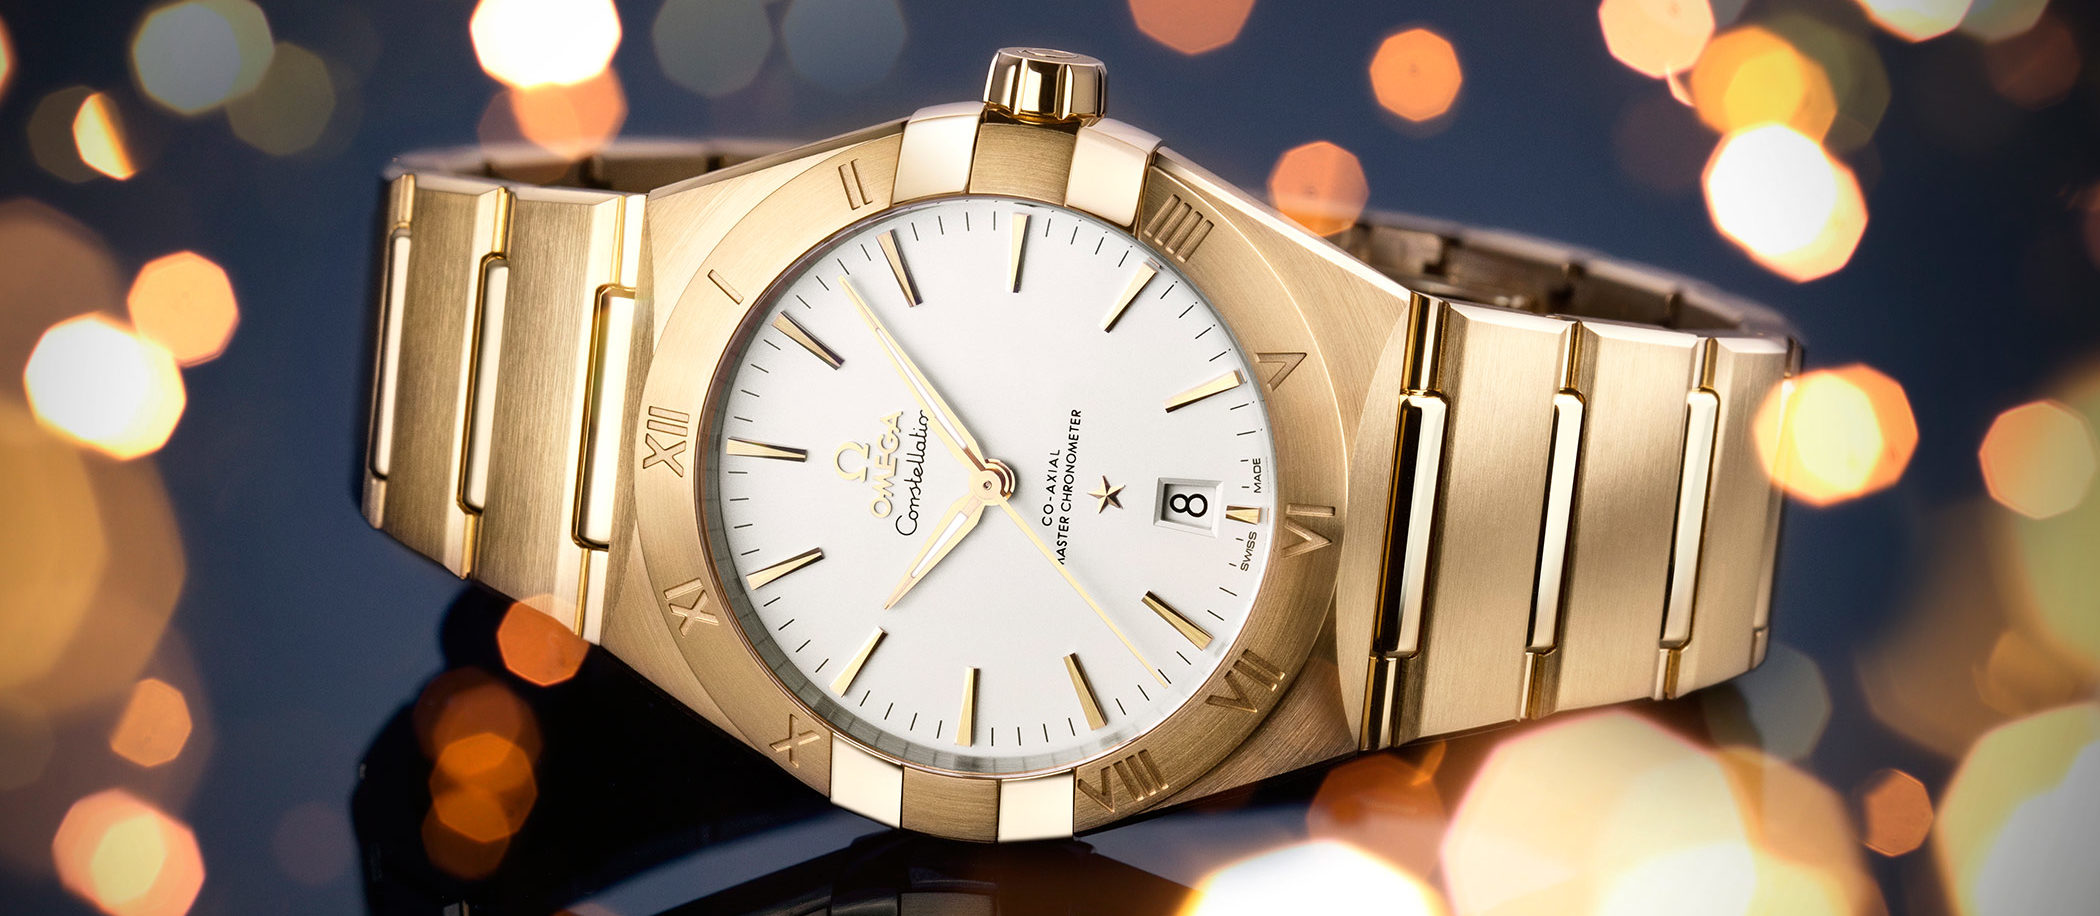 #Cultwatches : Replique Omega Constellation